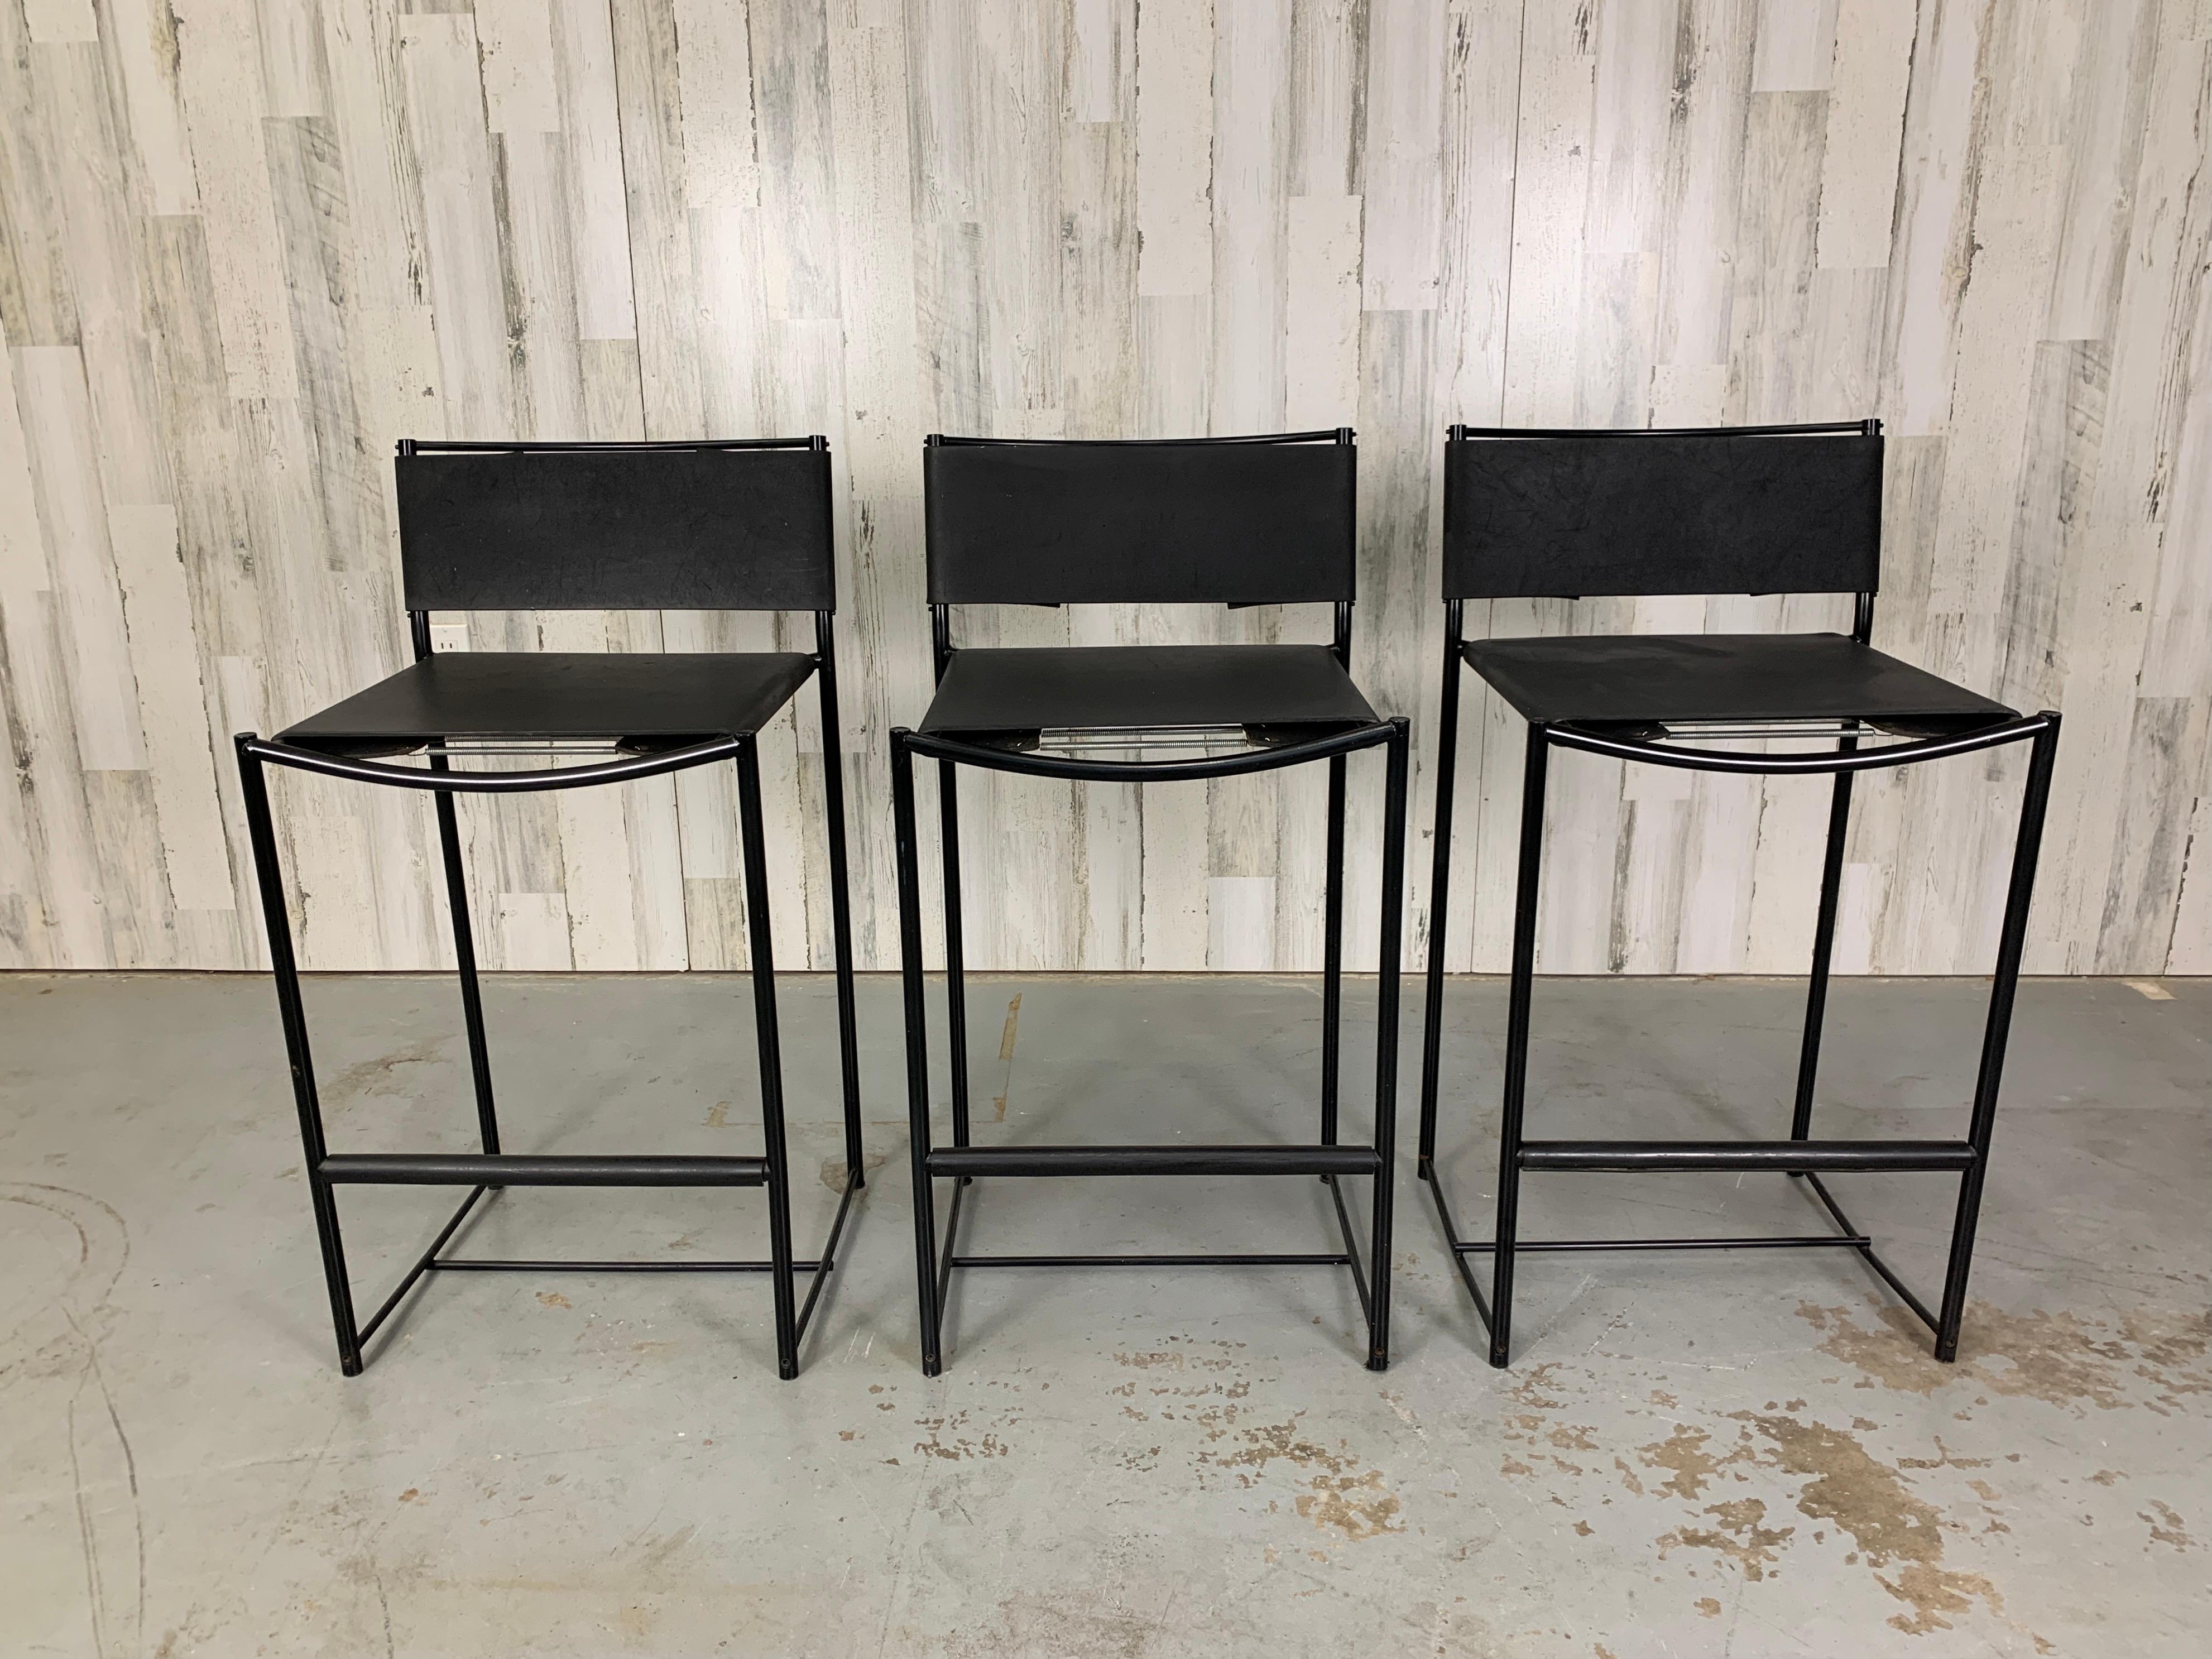 Set of three powder coated metal frames with rubber sling seats and back.